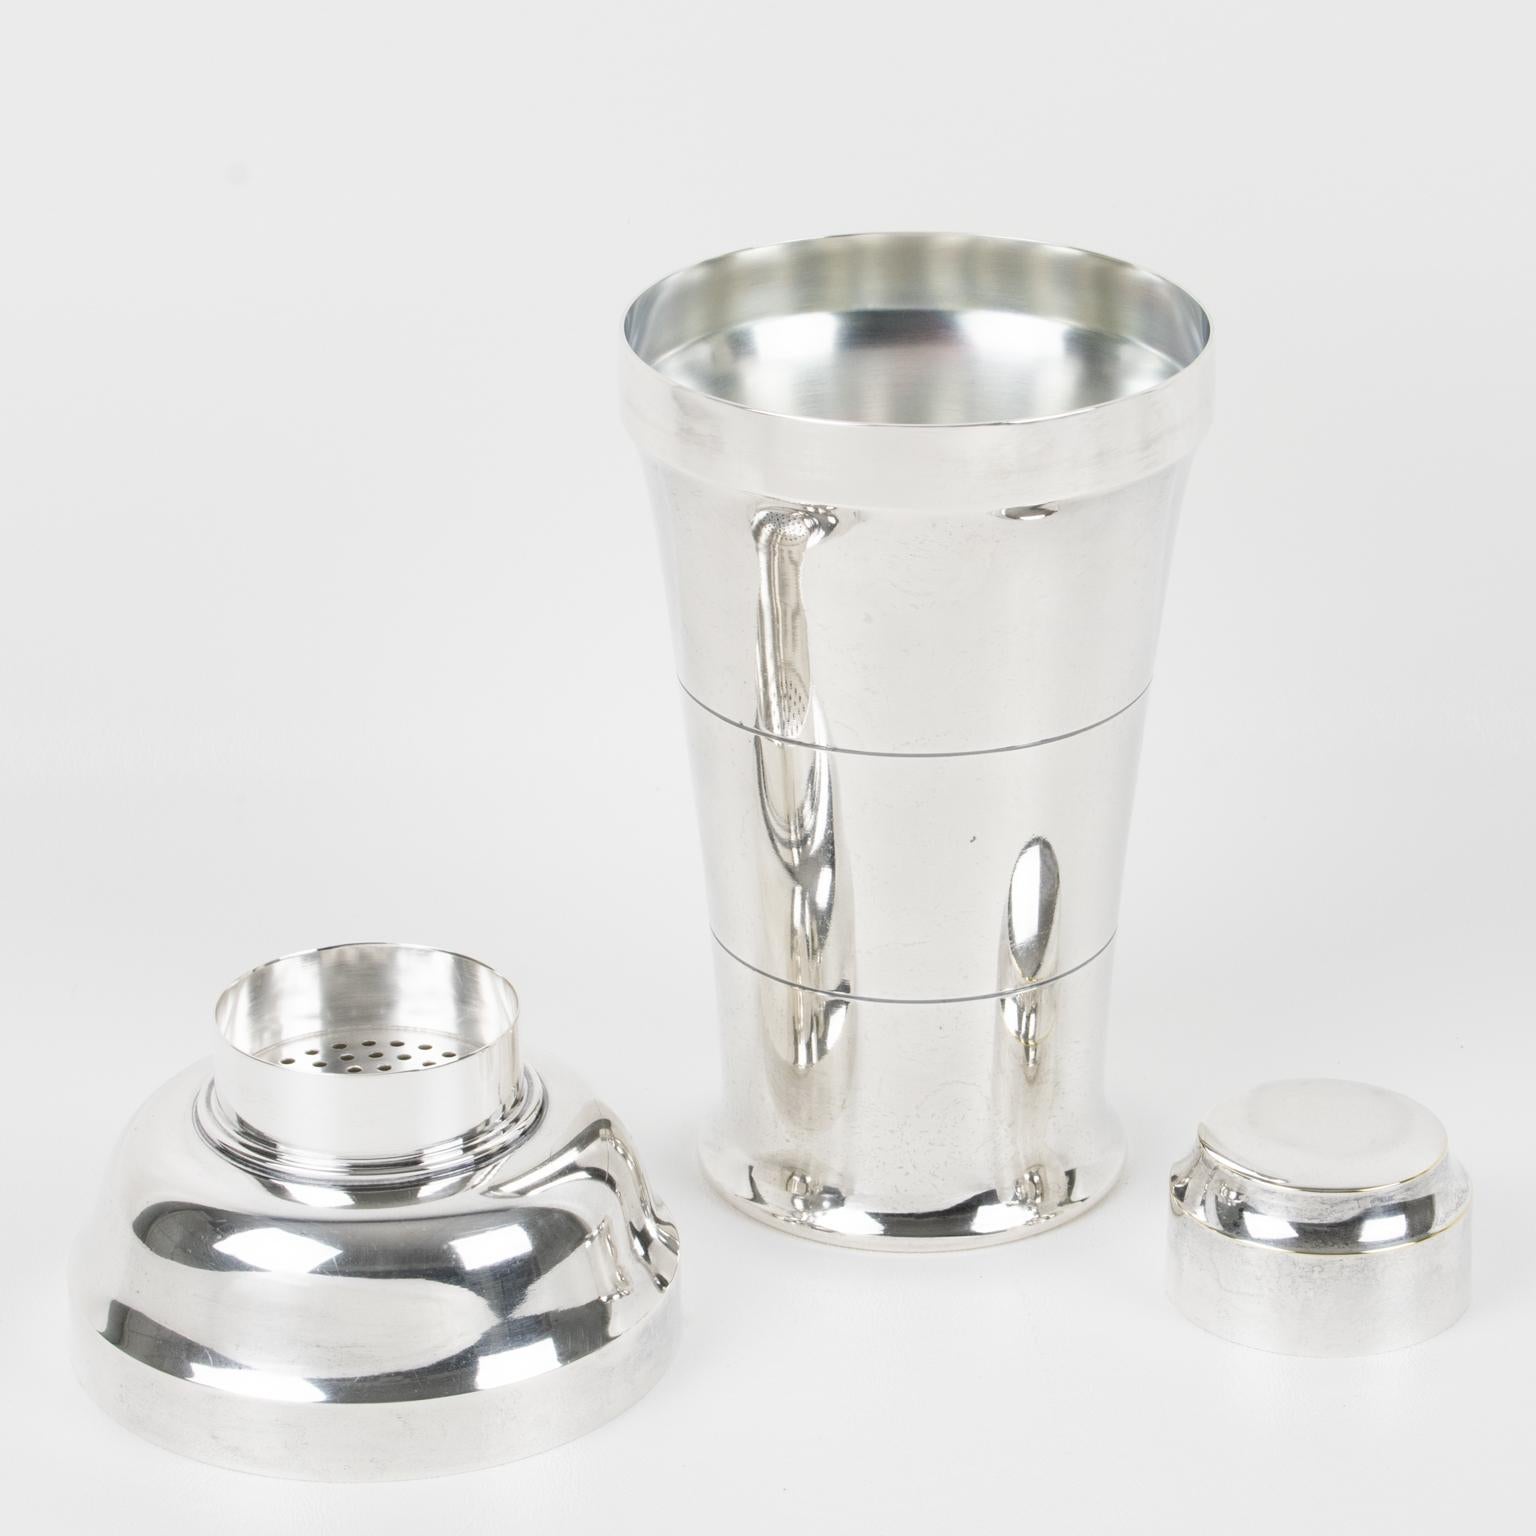 Elegant French Art Deco silver plate cylindrical cocktail or Martini shaker by silversmith Saint Medard, Paris. Three-sectioned designed cocktail shaker with removable cap and strainer. Lovely geometric shape with typical Deco design. Marked